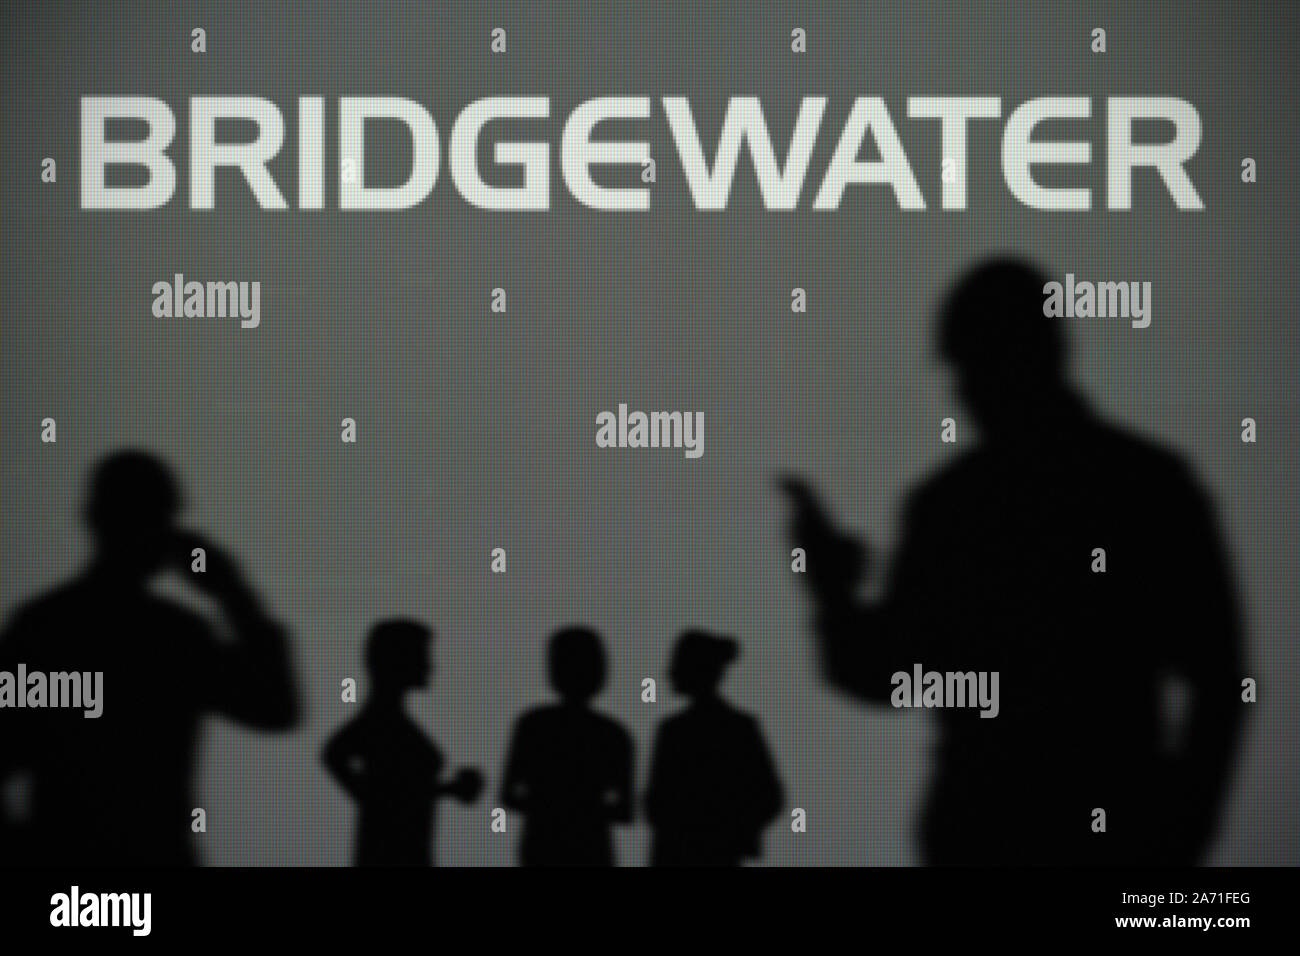 The Bridgewater Associates logo is seen on an LED screen in the background while a silhouetted person uses a smartphone (Editorial use only) Stock Photo